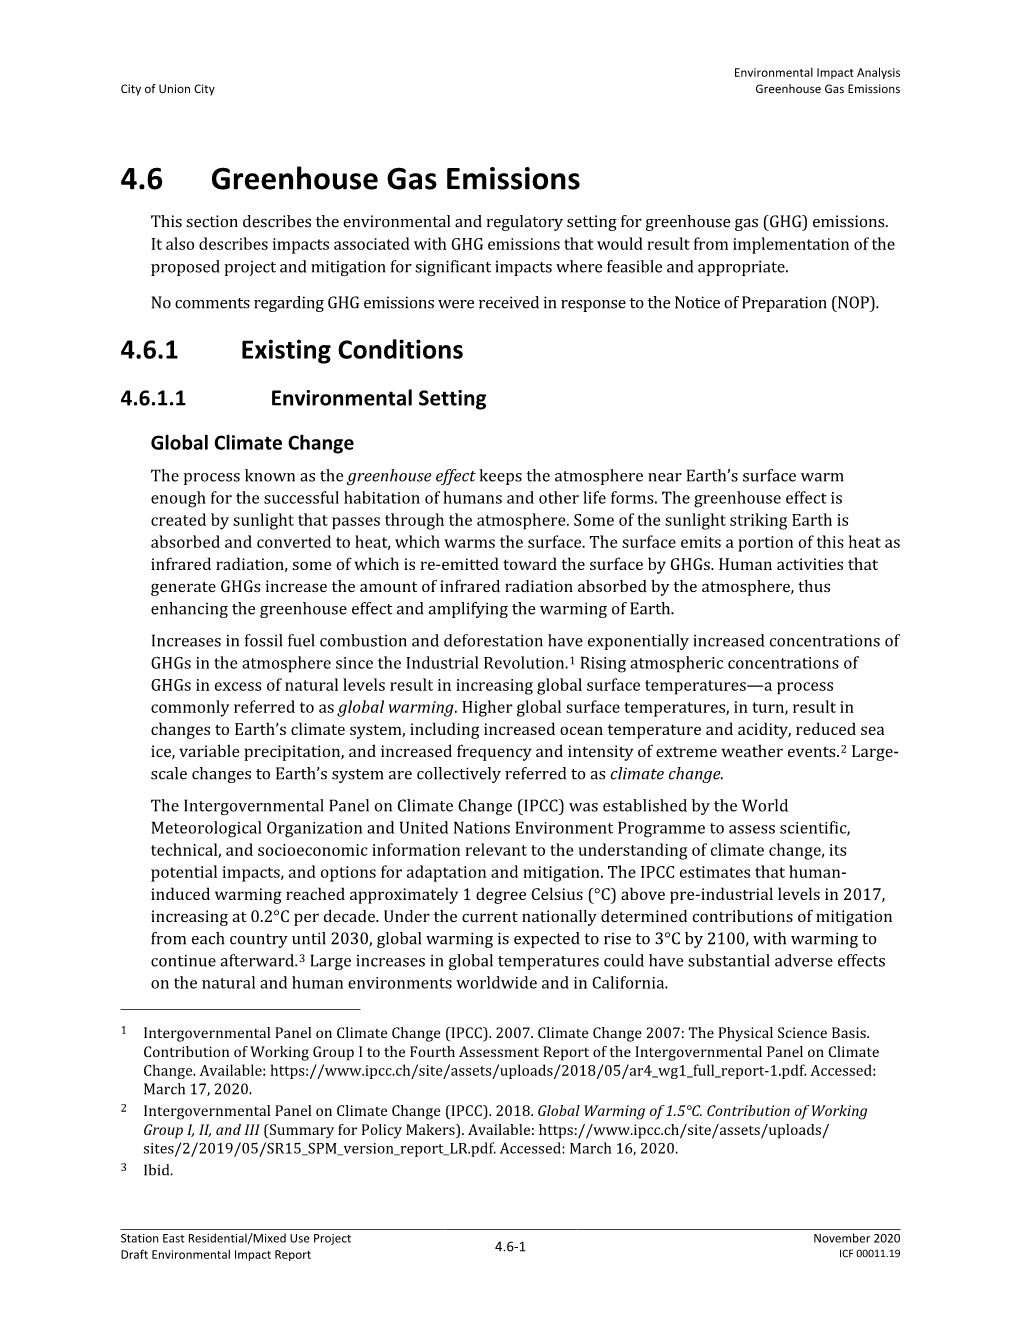 4.6 Greenhouse Gas Emissions This Section Describes the Environmental and Regulatory Setting for Greenhouse Gas (GHG) Emissions